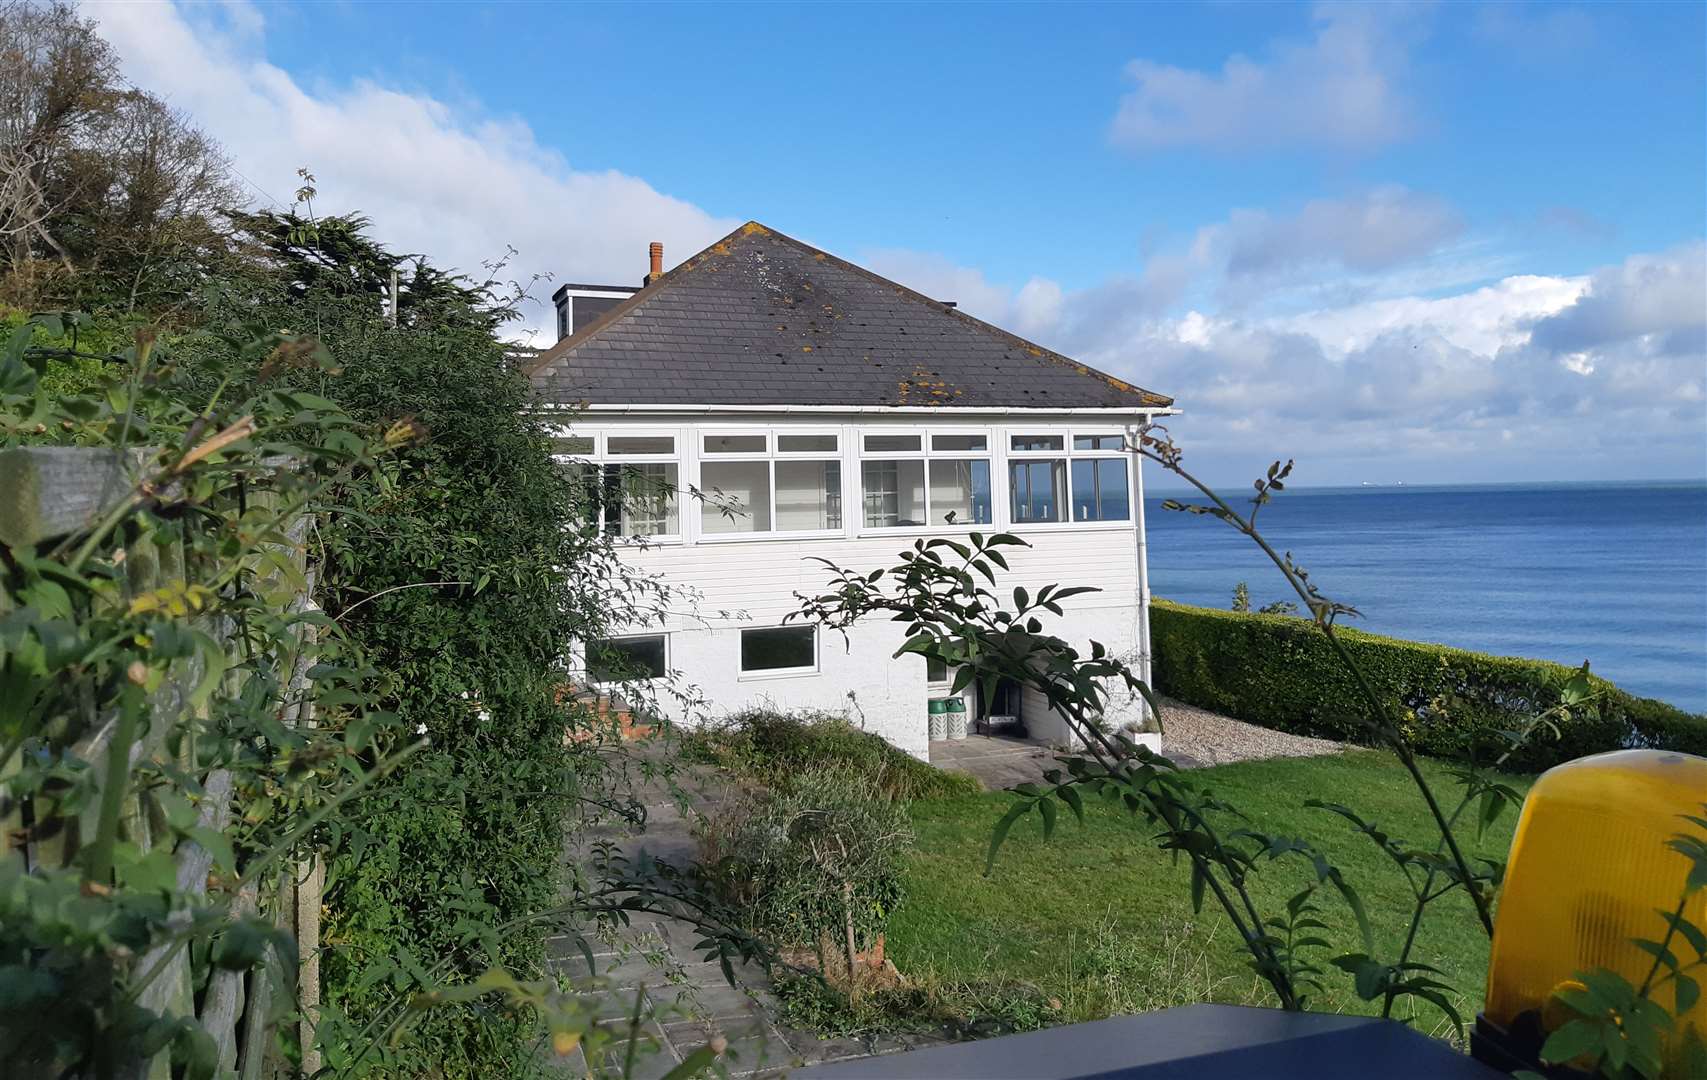 The Elphickes’ former home in St Margaret’s Bay sold for £1.525 million in 2021